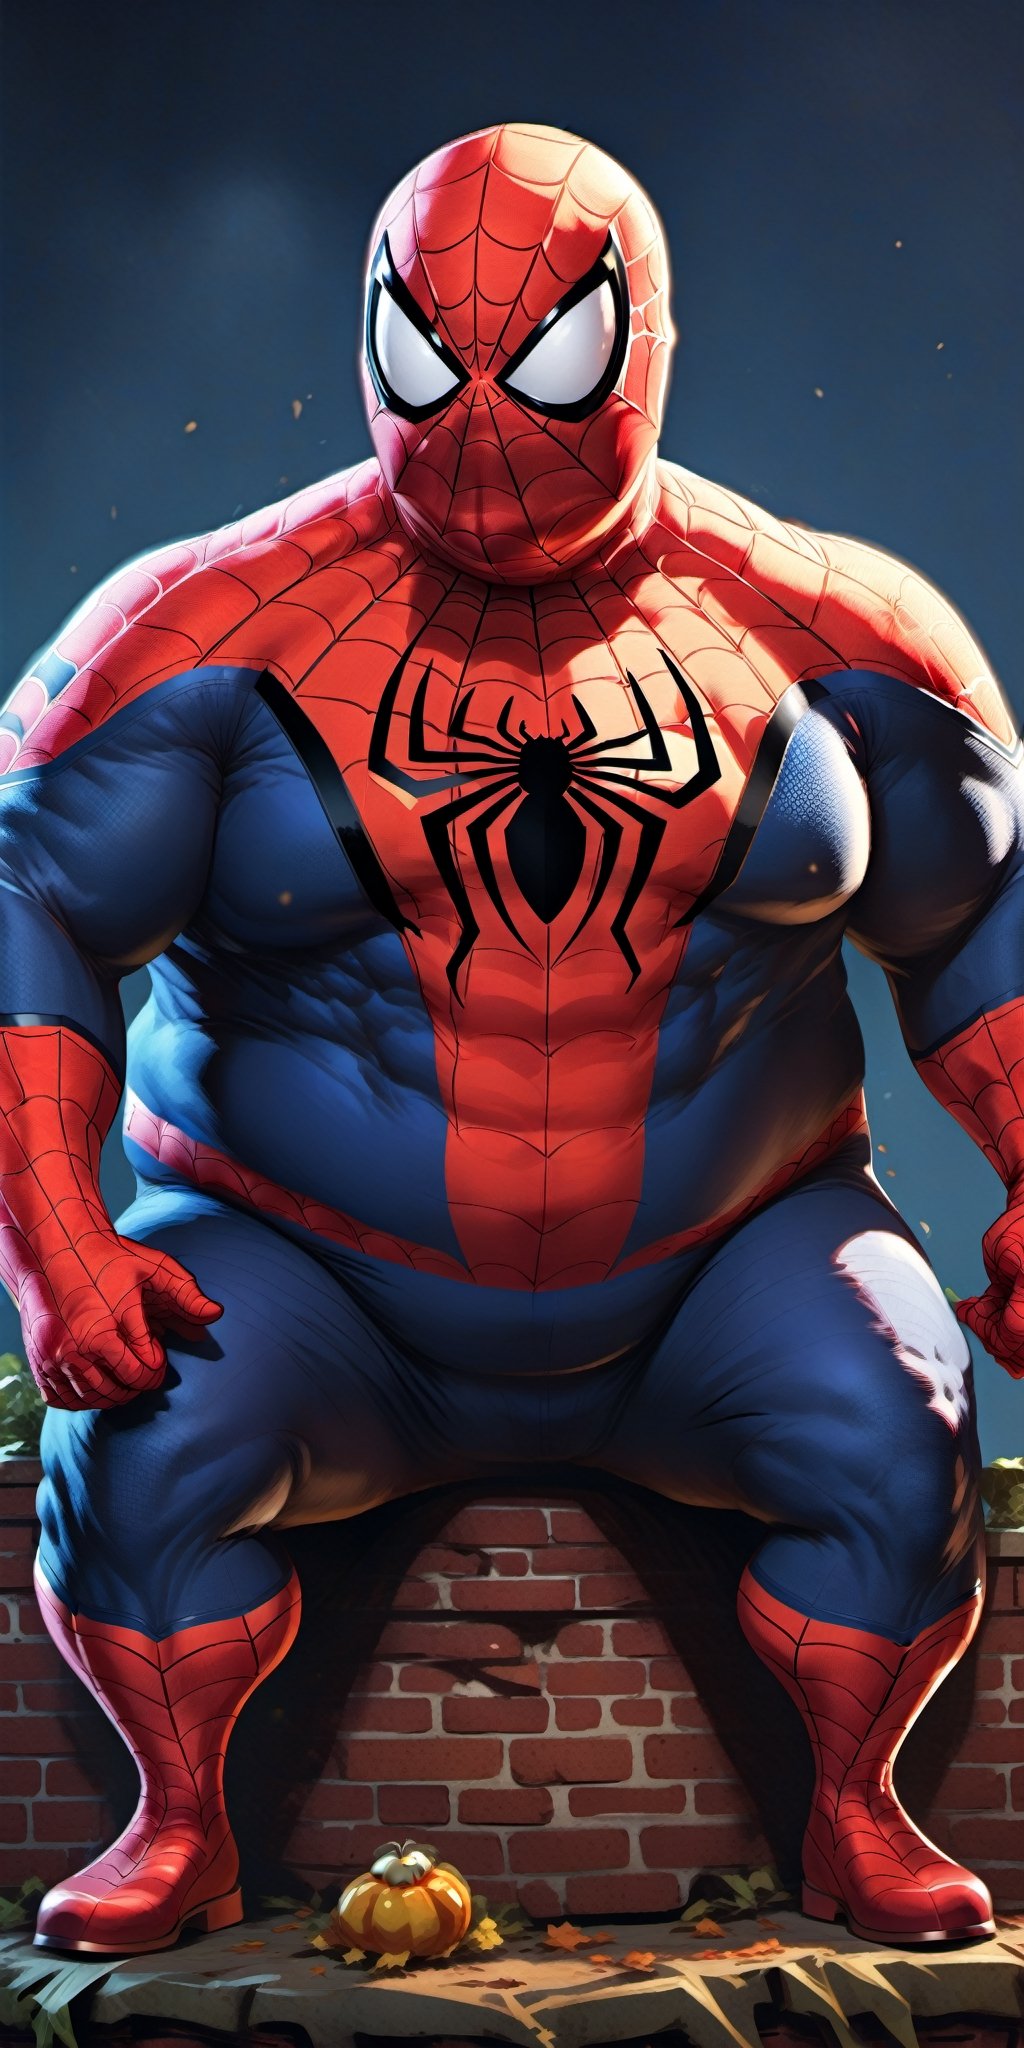 Generate a highly detailed and amusing image of Spider-Man, but with an exaggerated twist – depict Spider-Man as an extremely chubby and funny superhero. Ensure the character retains the iconic Spider-Man costume, but emphasize the humorous aspect of an unexpectedly plump superhero.